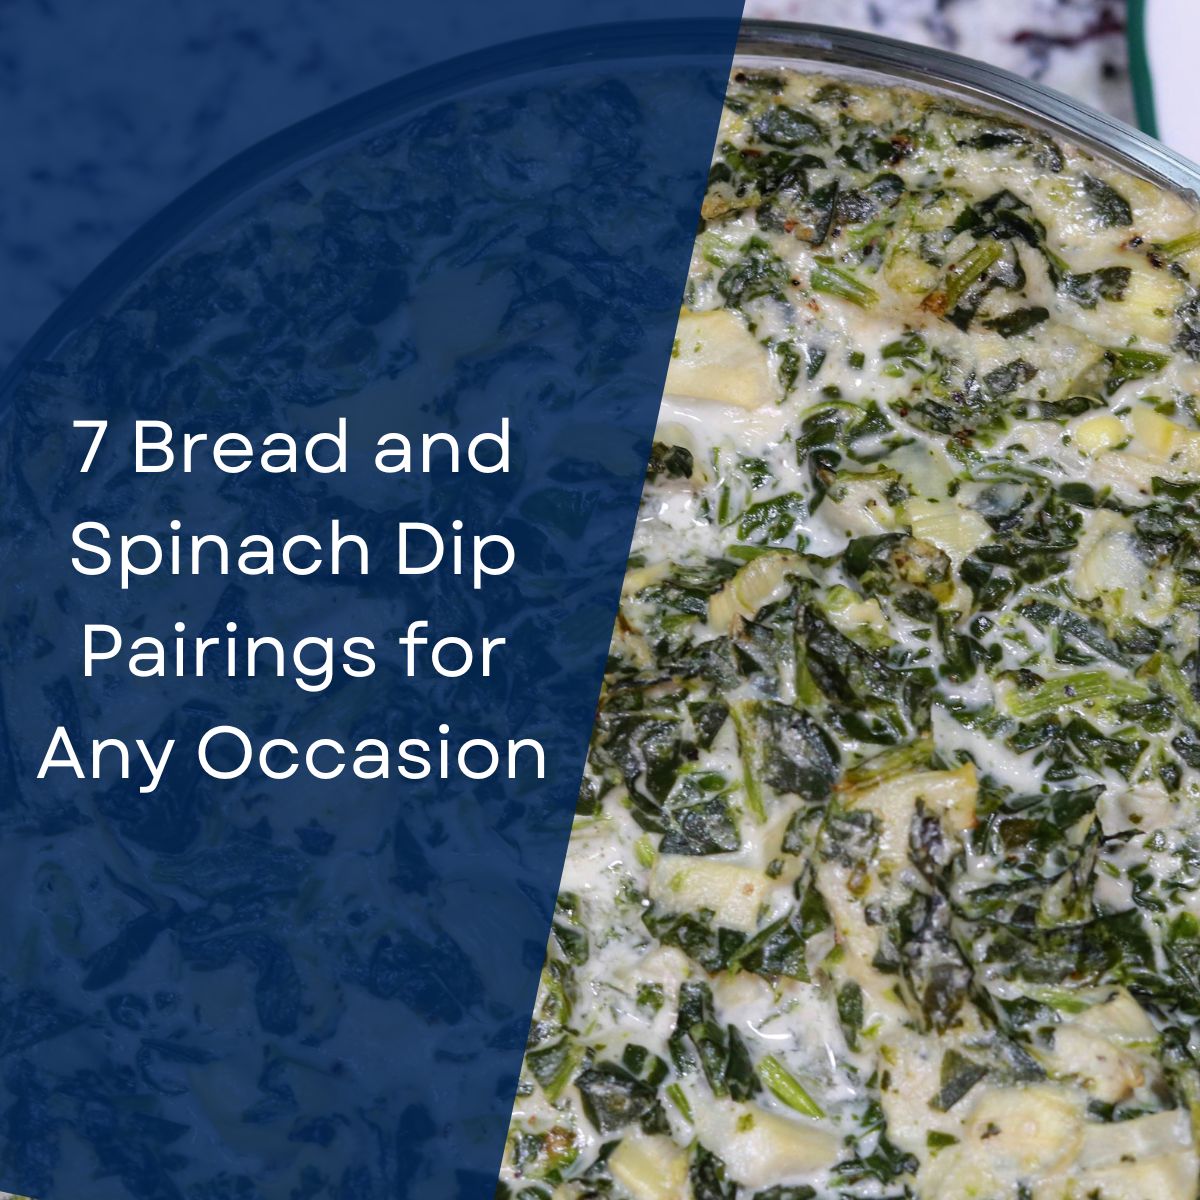 7 Bread and Spinach Dip Pairings for Any Occasion